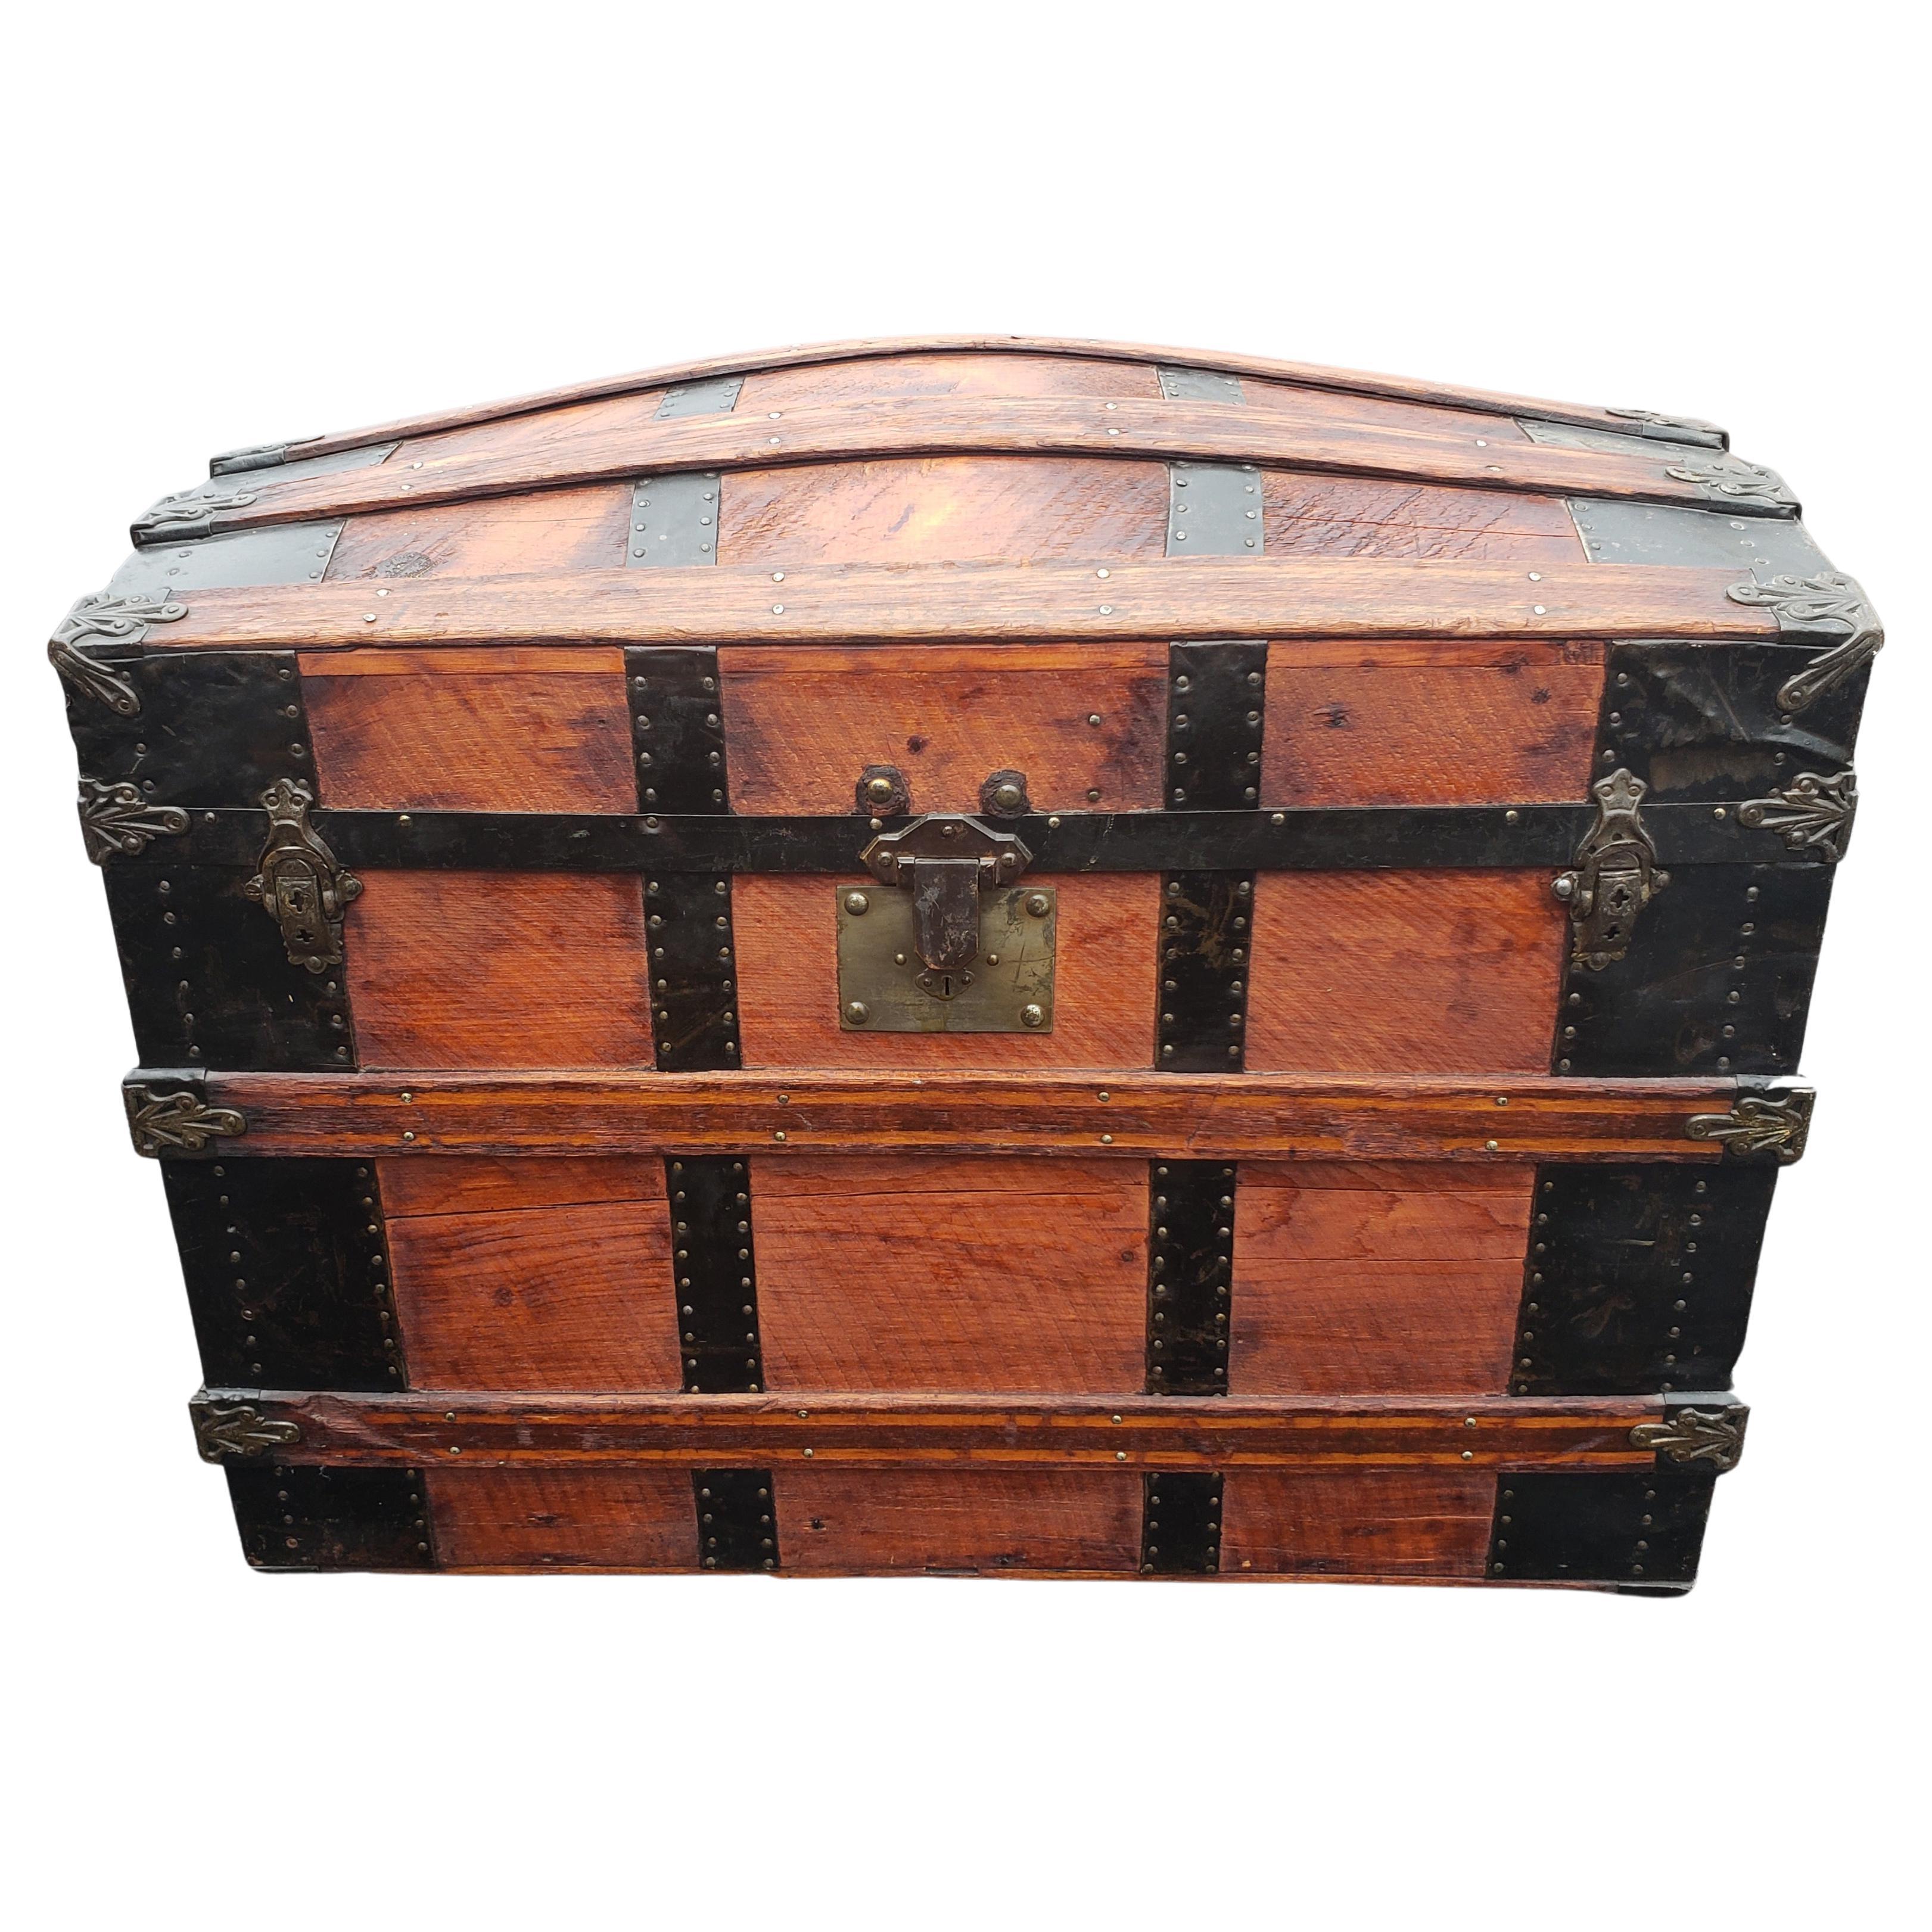 Late 19th Century (1880s) Restored Antique Dome Top Trunk For Sale! Unique Features Include Polished Silvery Hardware Contrasting Beautifully Against the Beautiful Grain of the Natural Pine Wood Body and Red Oak Wood Slats. Features Polished Silvery